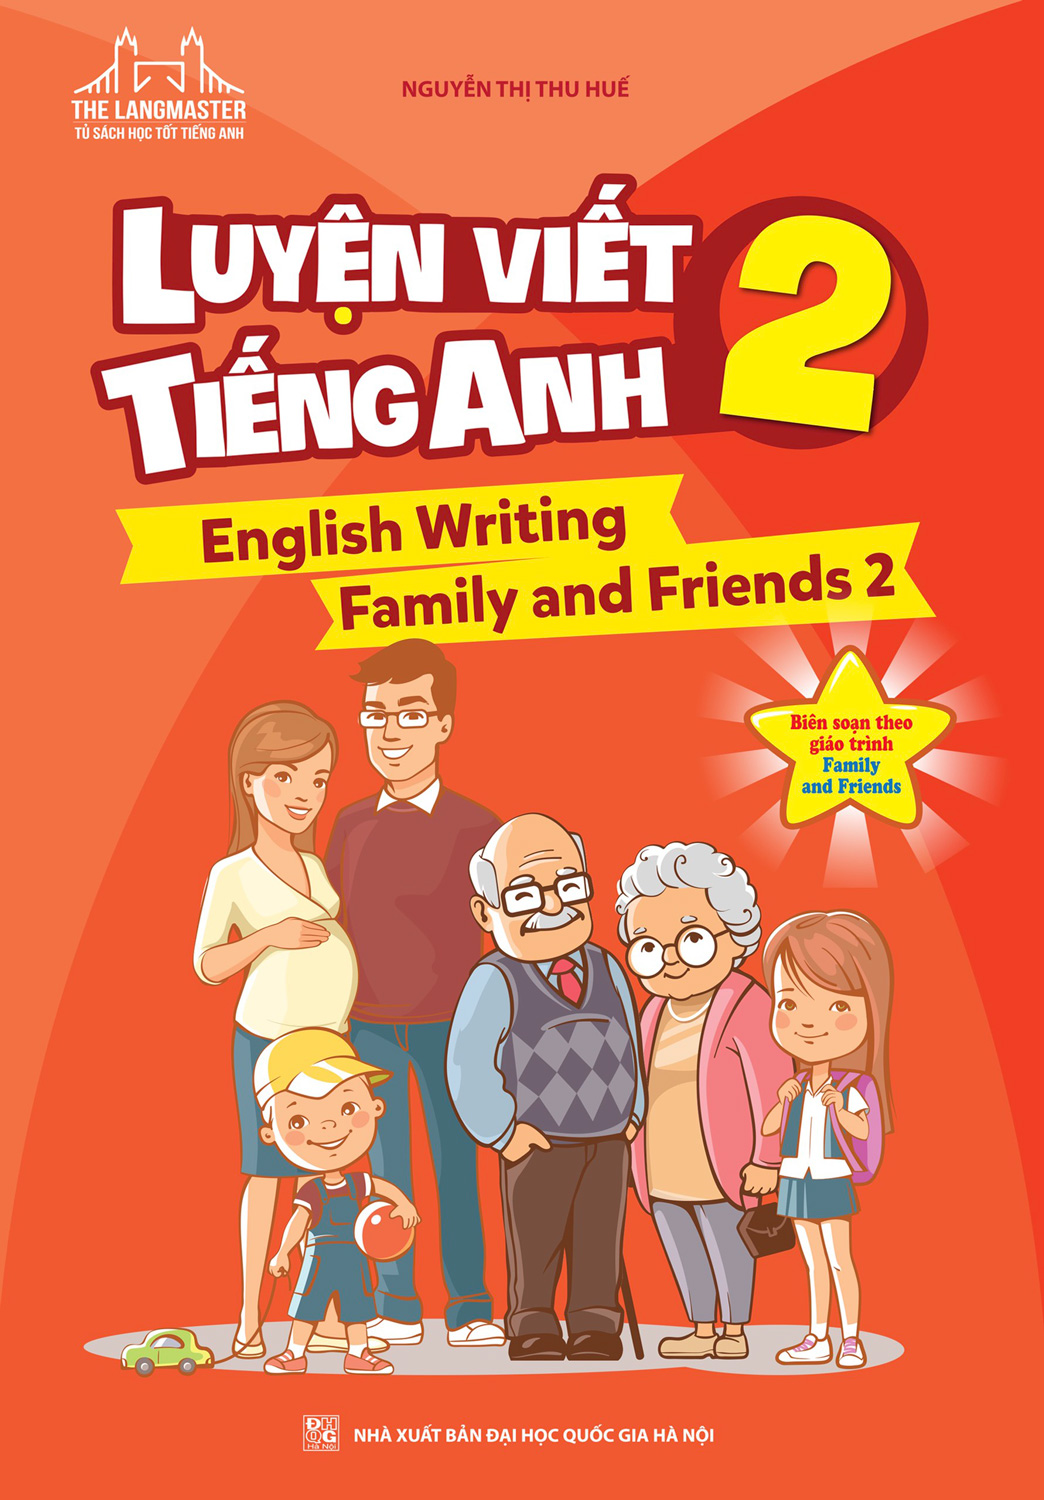 The langmaster - Luyện Viết Tiếng Anh 2 (English Writing Family And Friends 2)